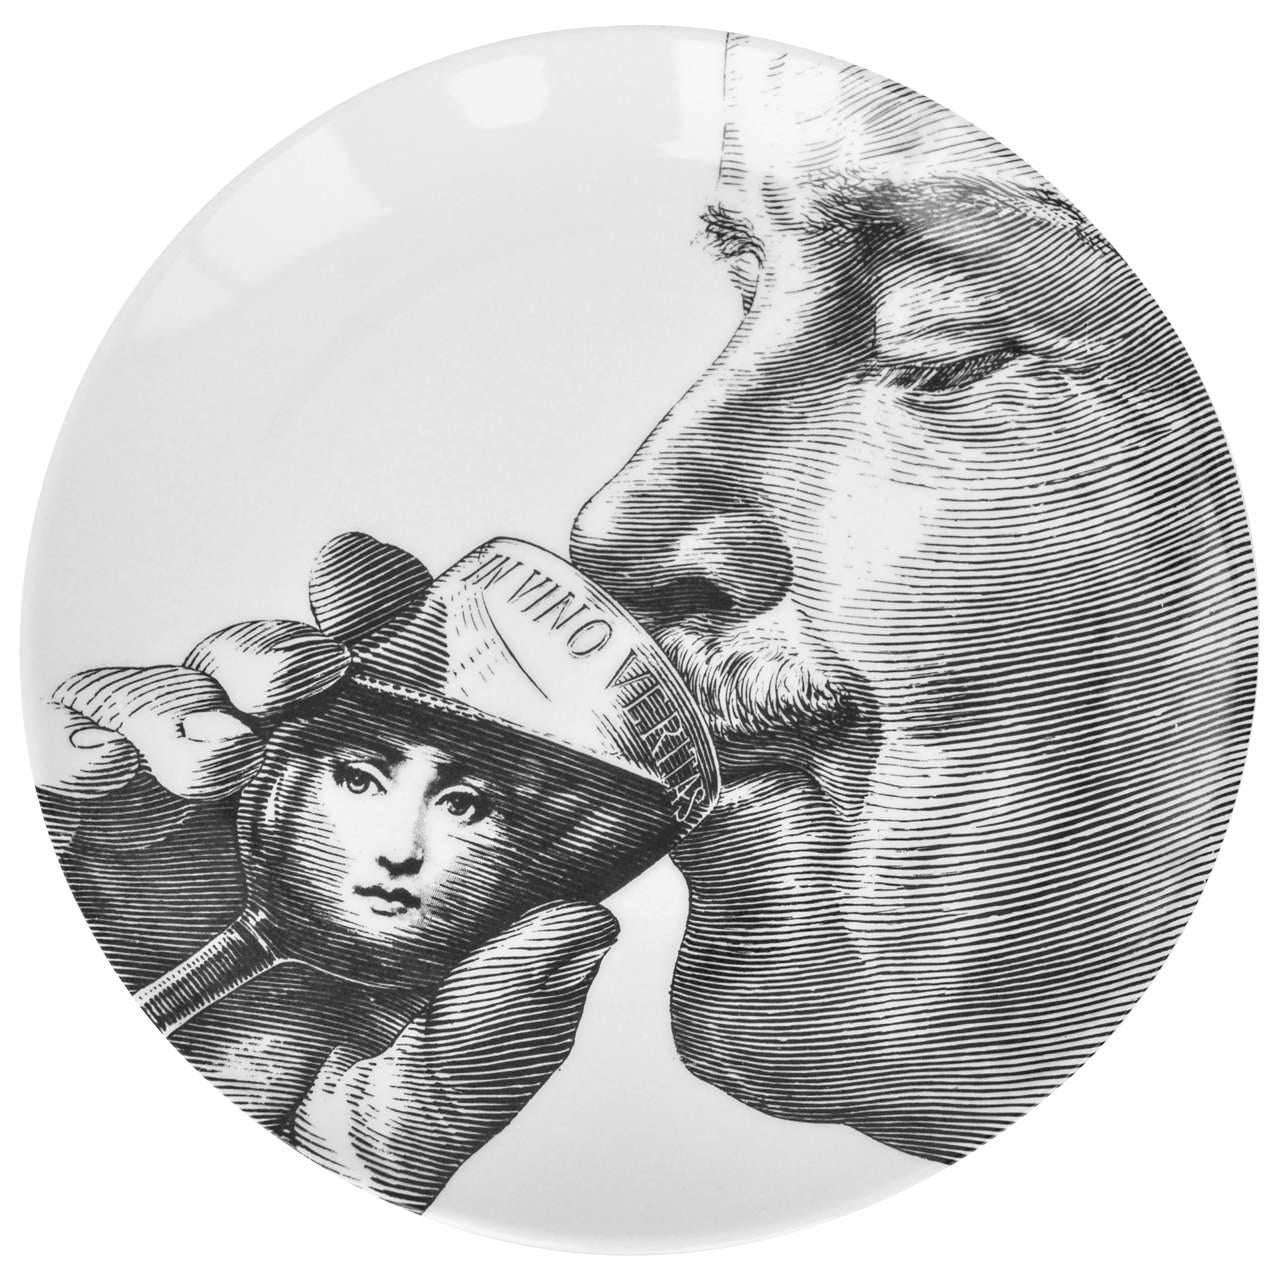 Fornasetti Plate with Self-Portrait, 